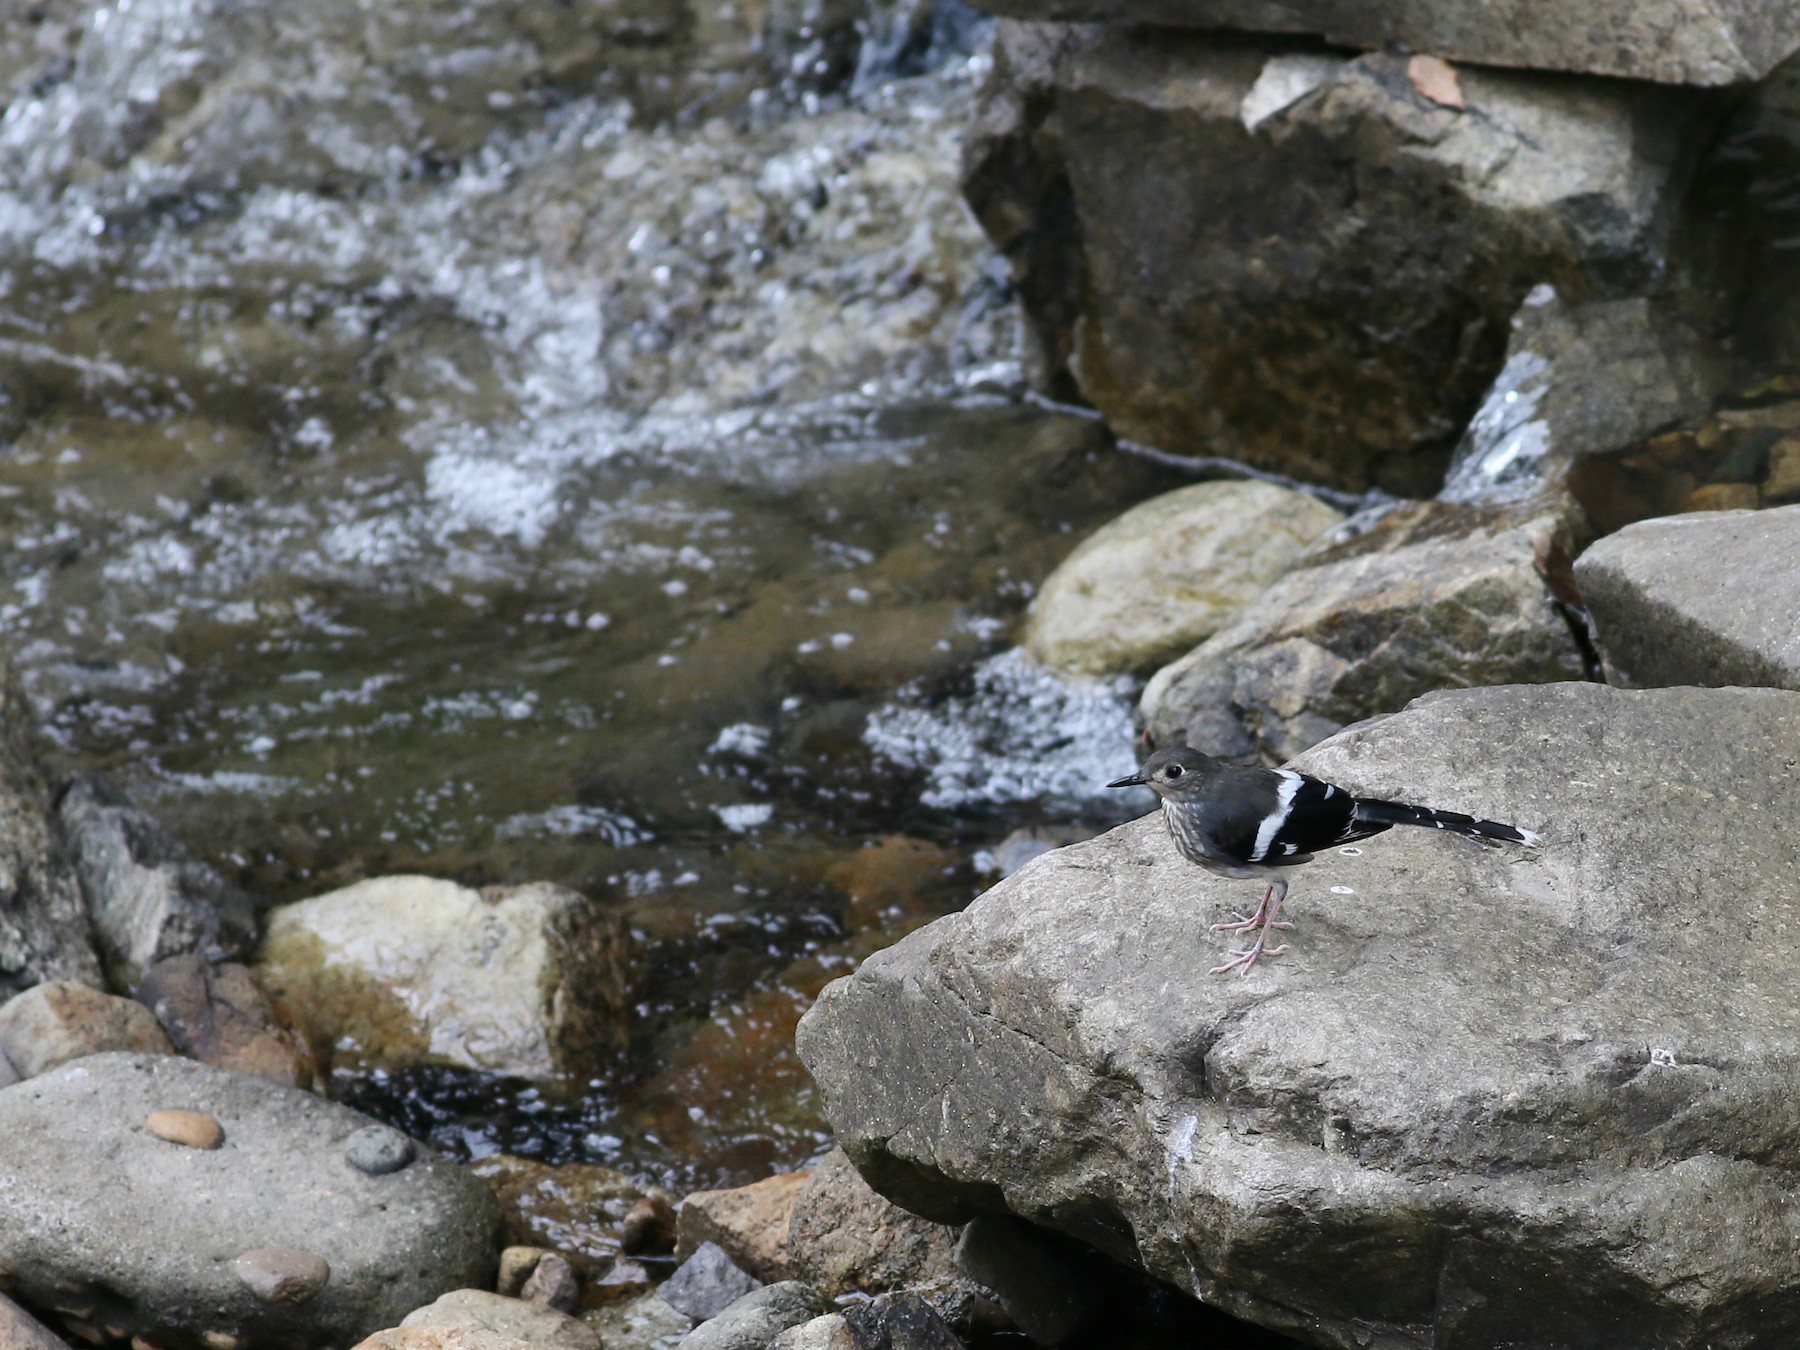 Slaty-backed Forktail - Ting-Wei (廷維) HUNG (洪)